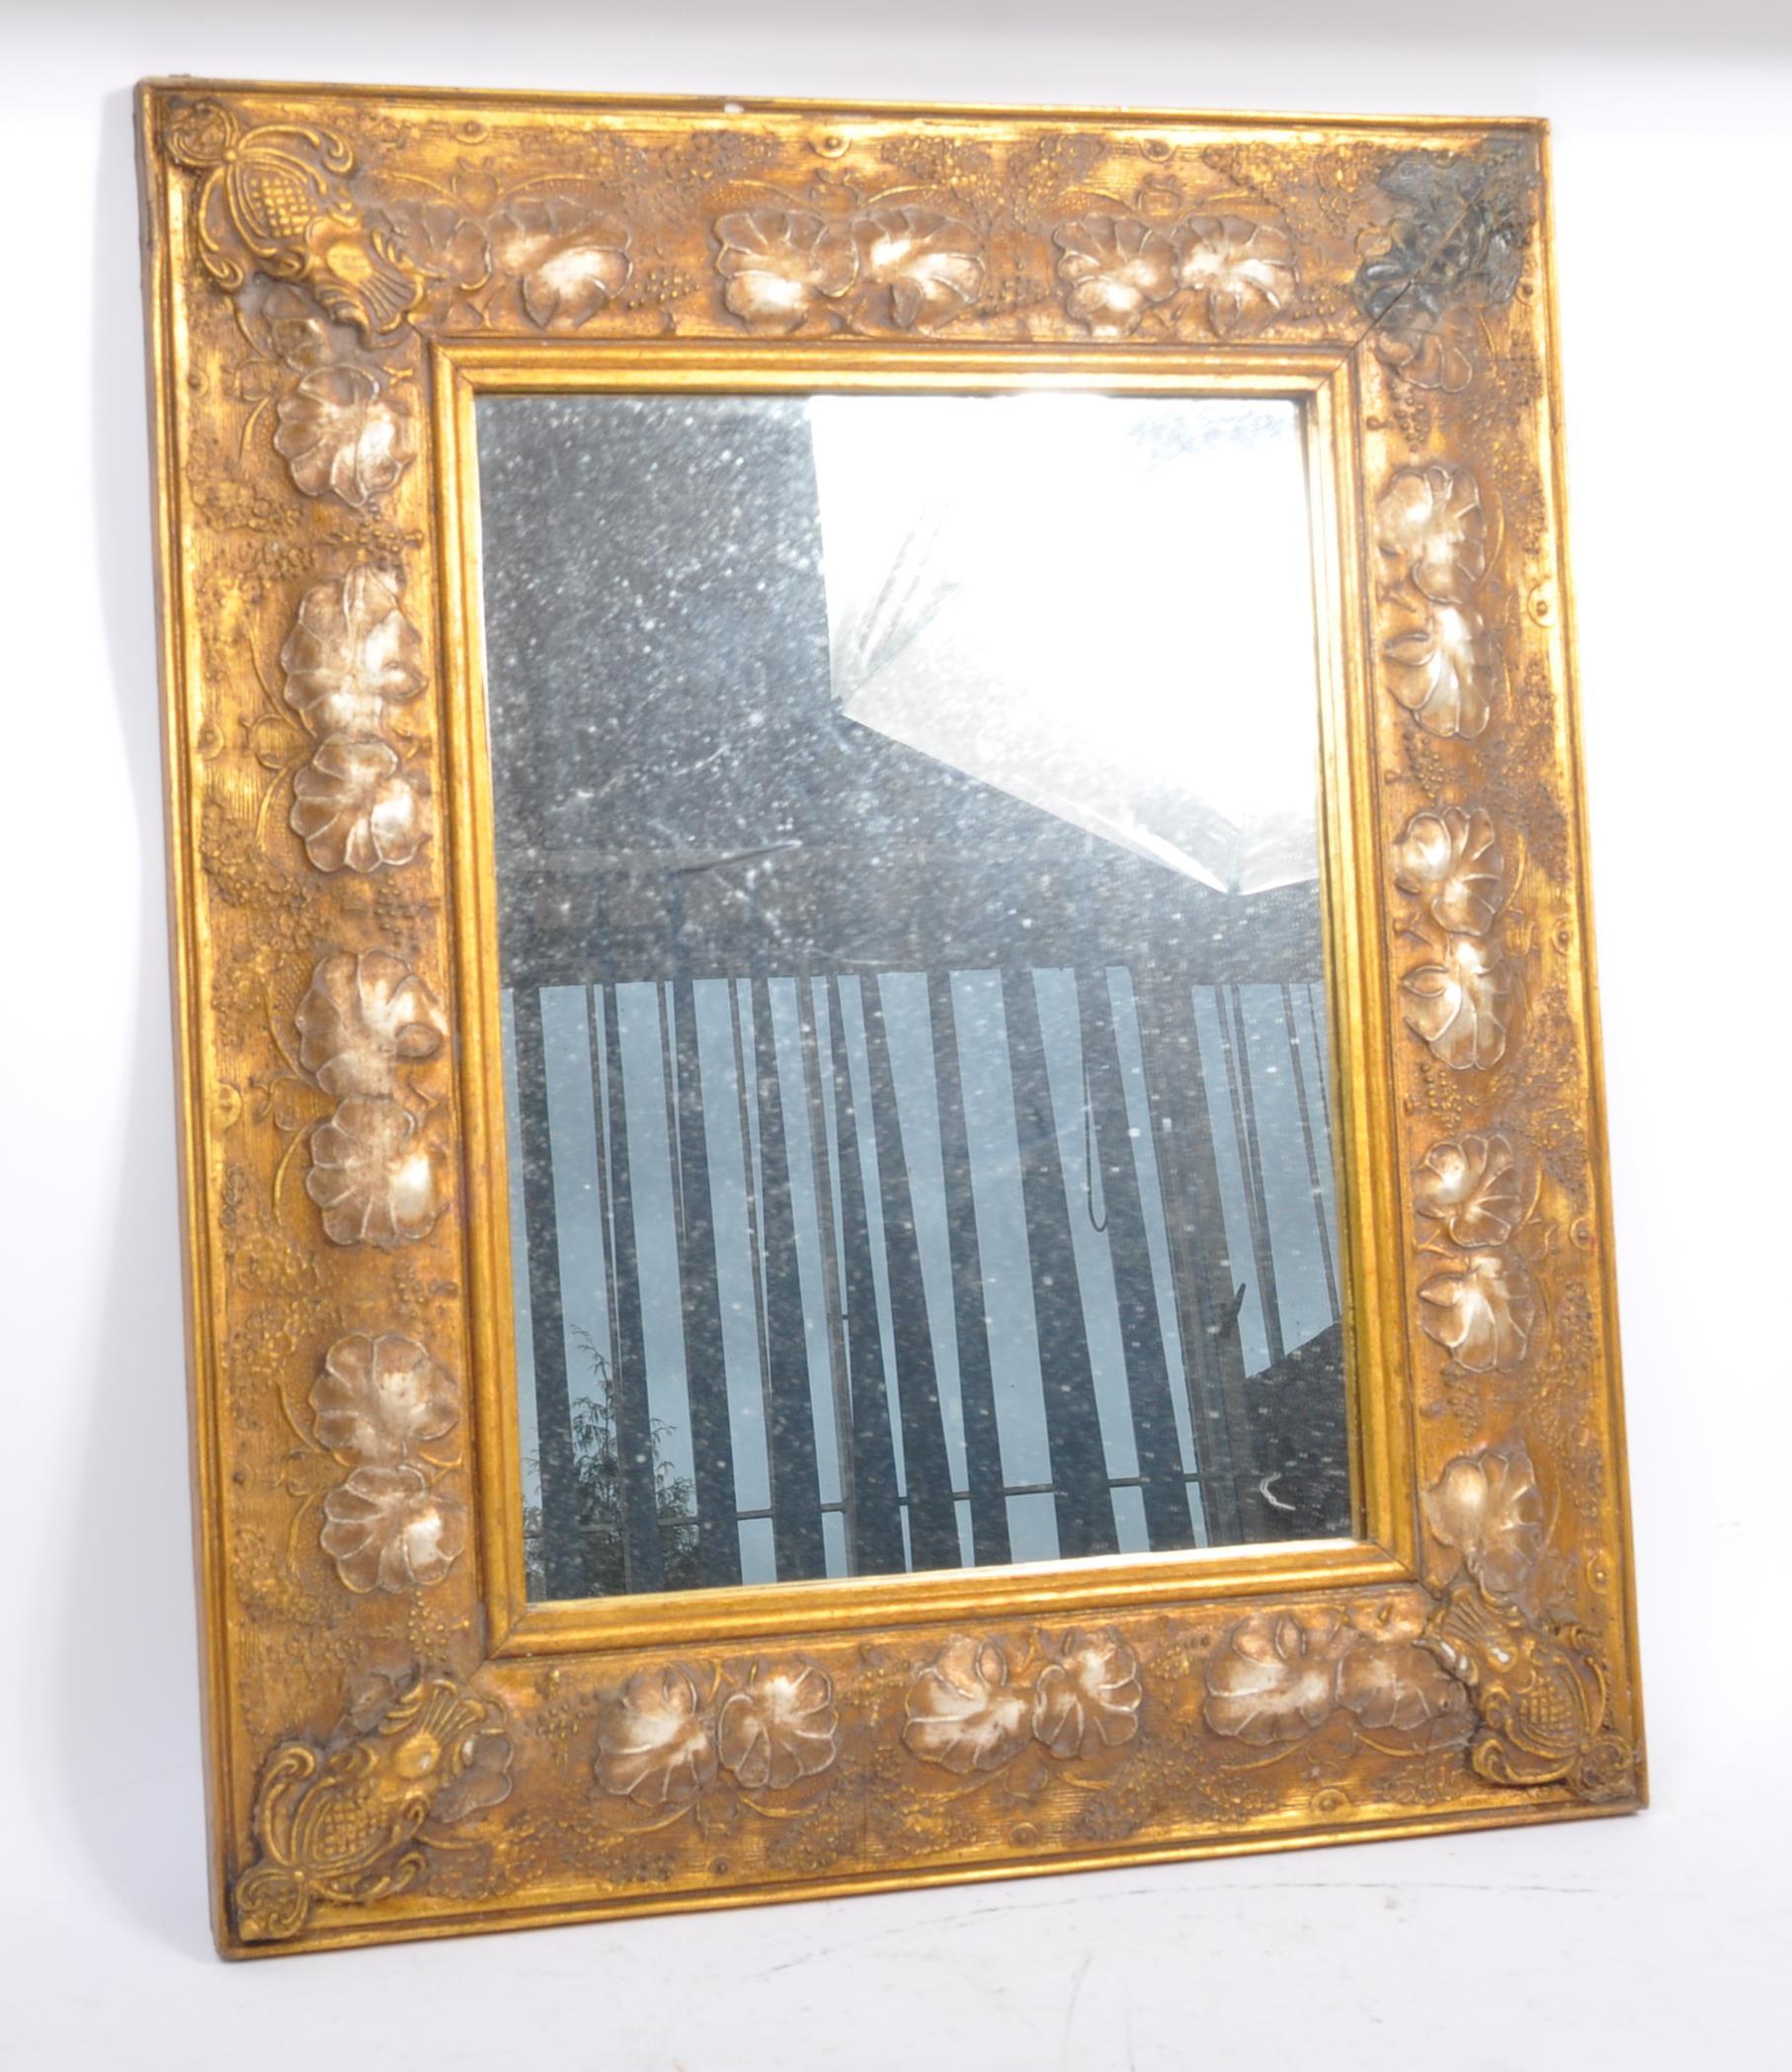 20TH CENTURY GILT RELIEF FRAME MIRROR - Image 7 of 8